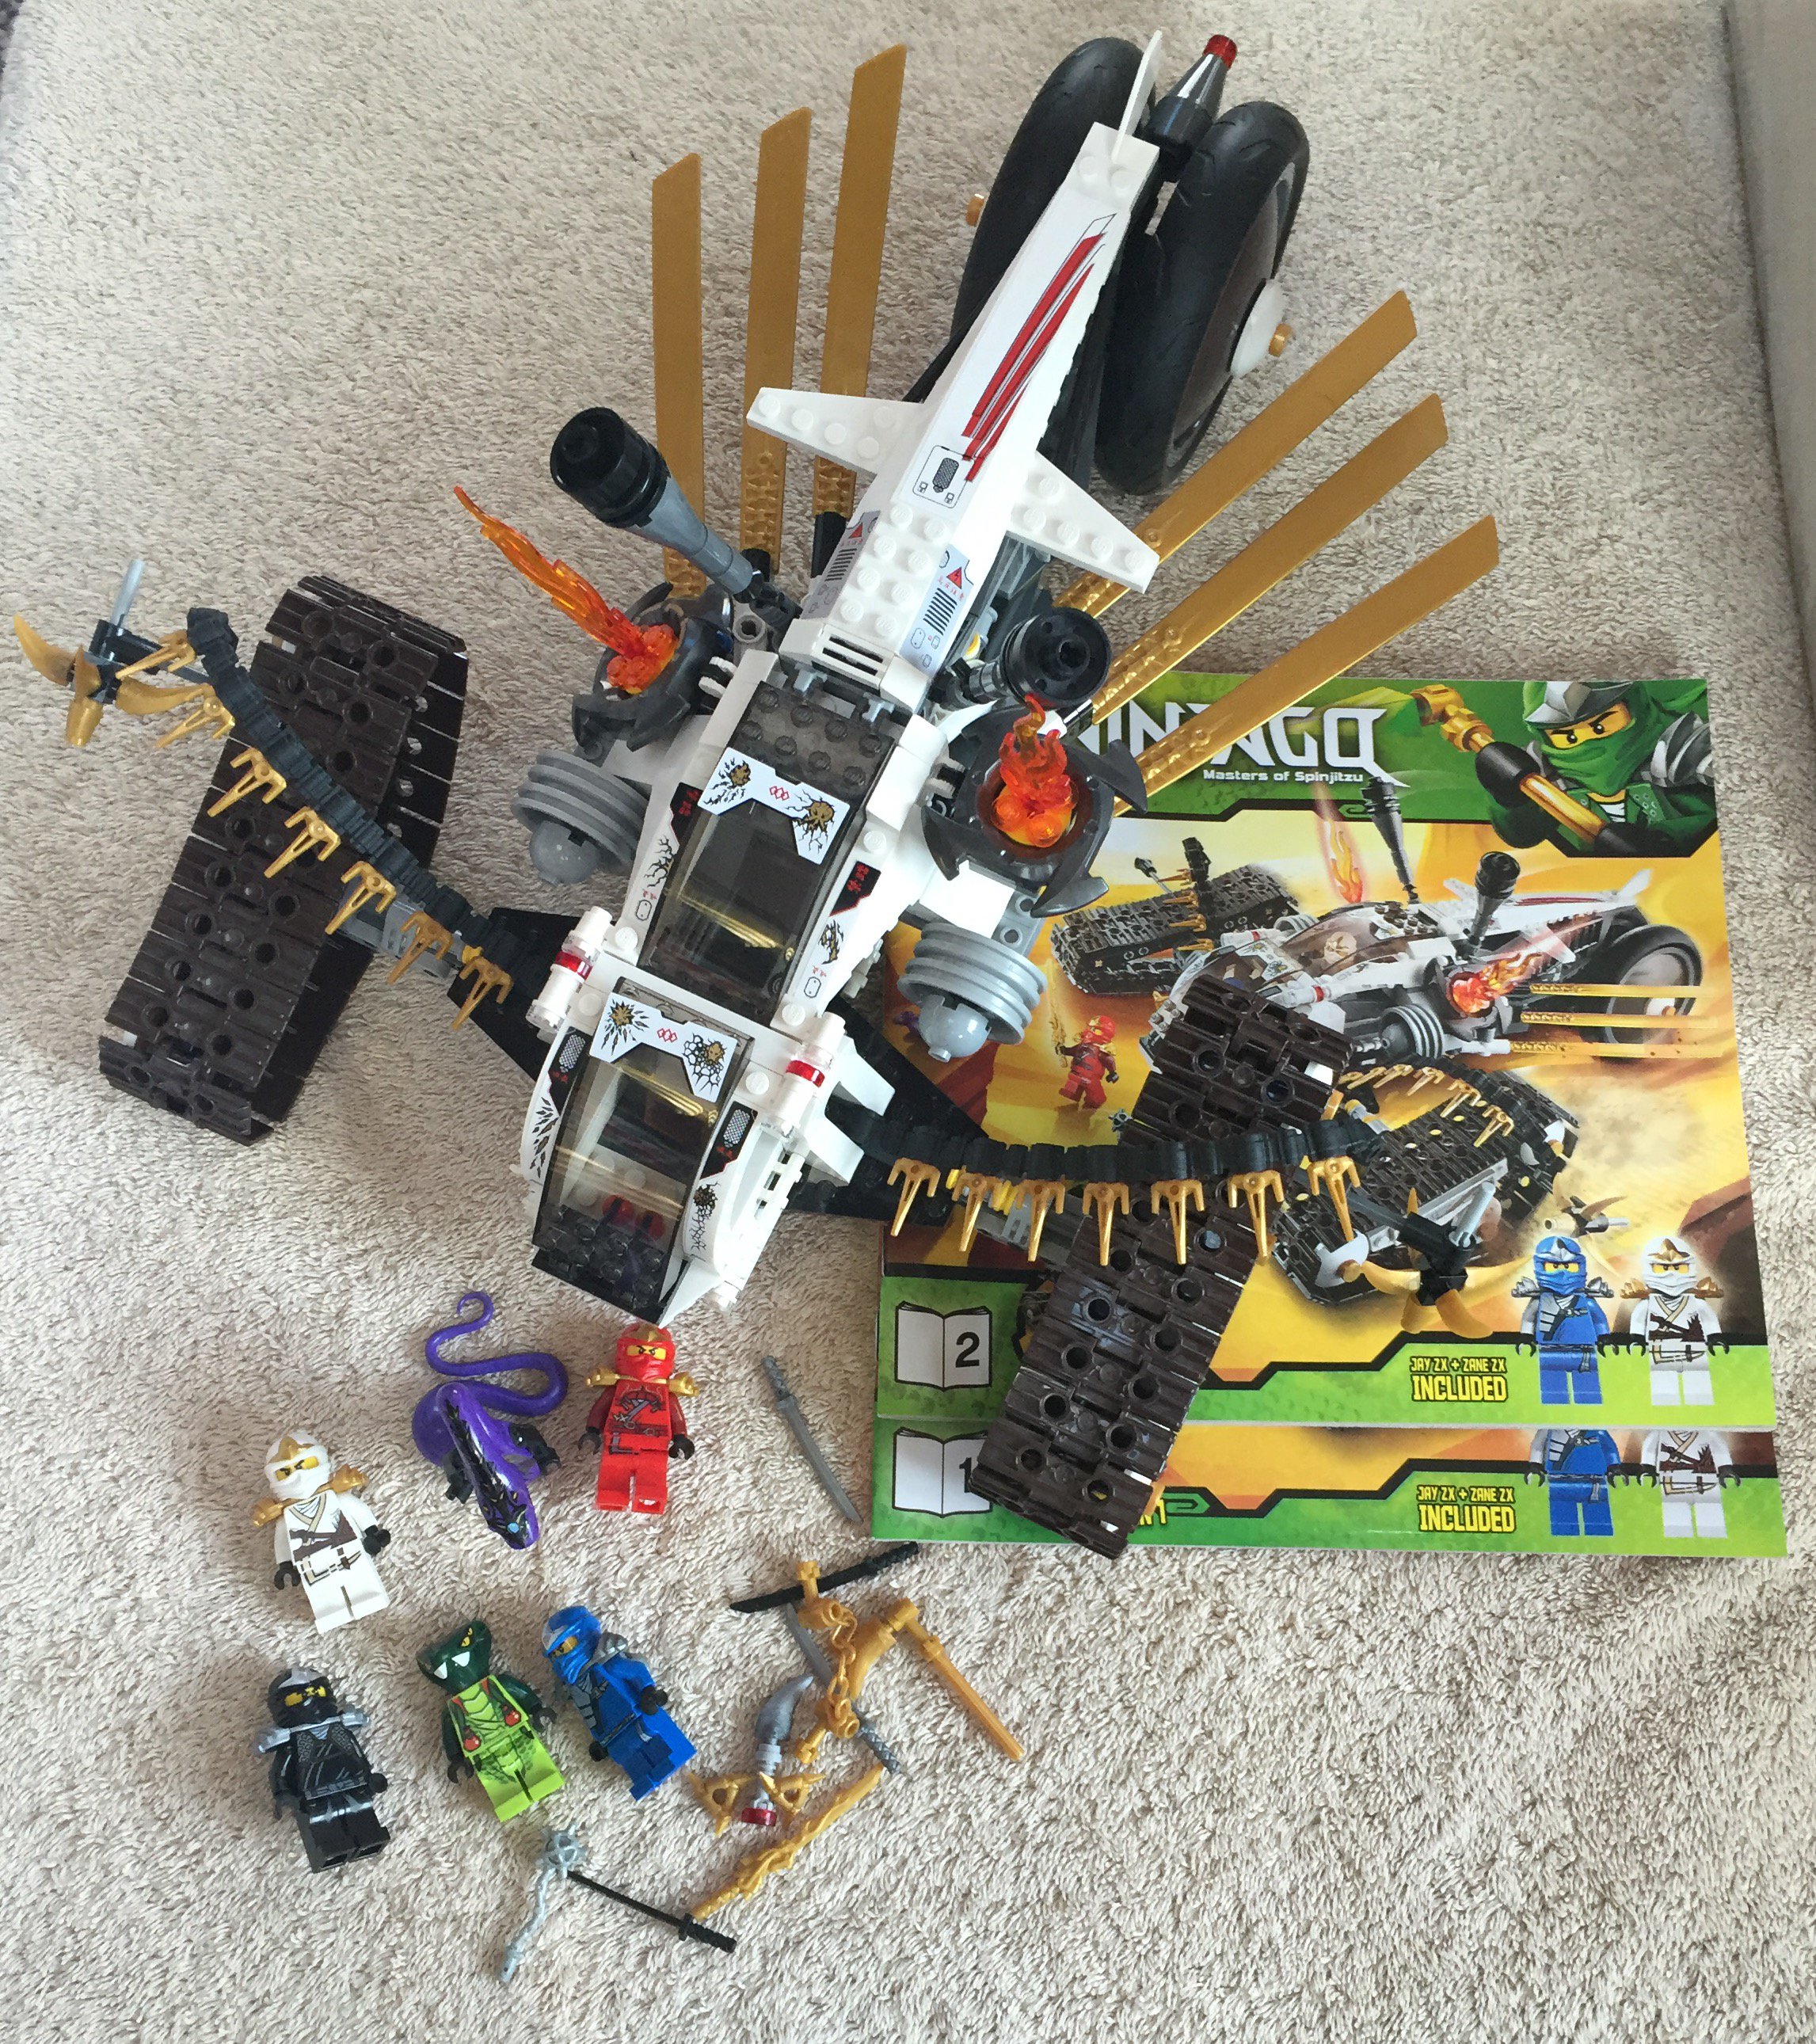 ude af drift Flere websted Toys & LEGO For Sale on Twitter: "Upcoming ebay listing: 9449 Ultra Sonic  Raider: 100% Complete with box #ninjago #lego store:  https://t.co/oNZYJmYhkm https://t.co/ZsAL0UE3Lo" / Twitter